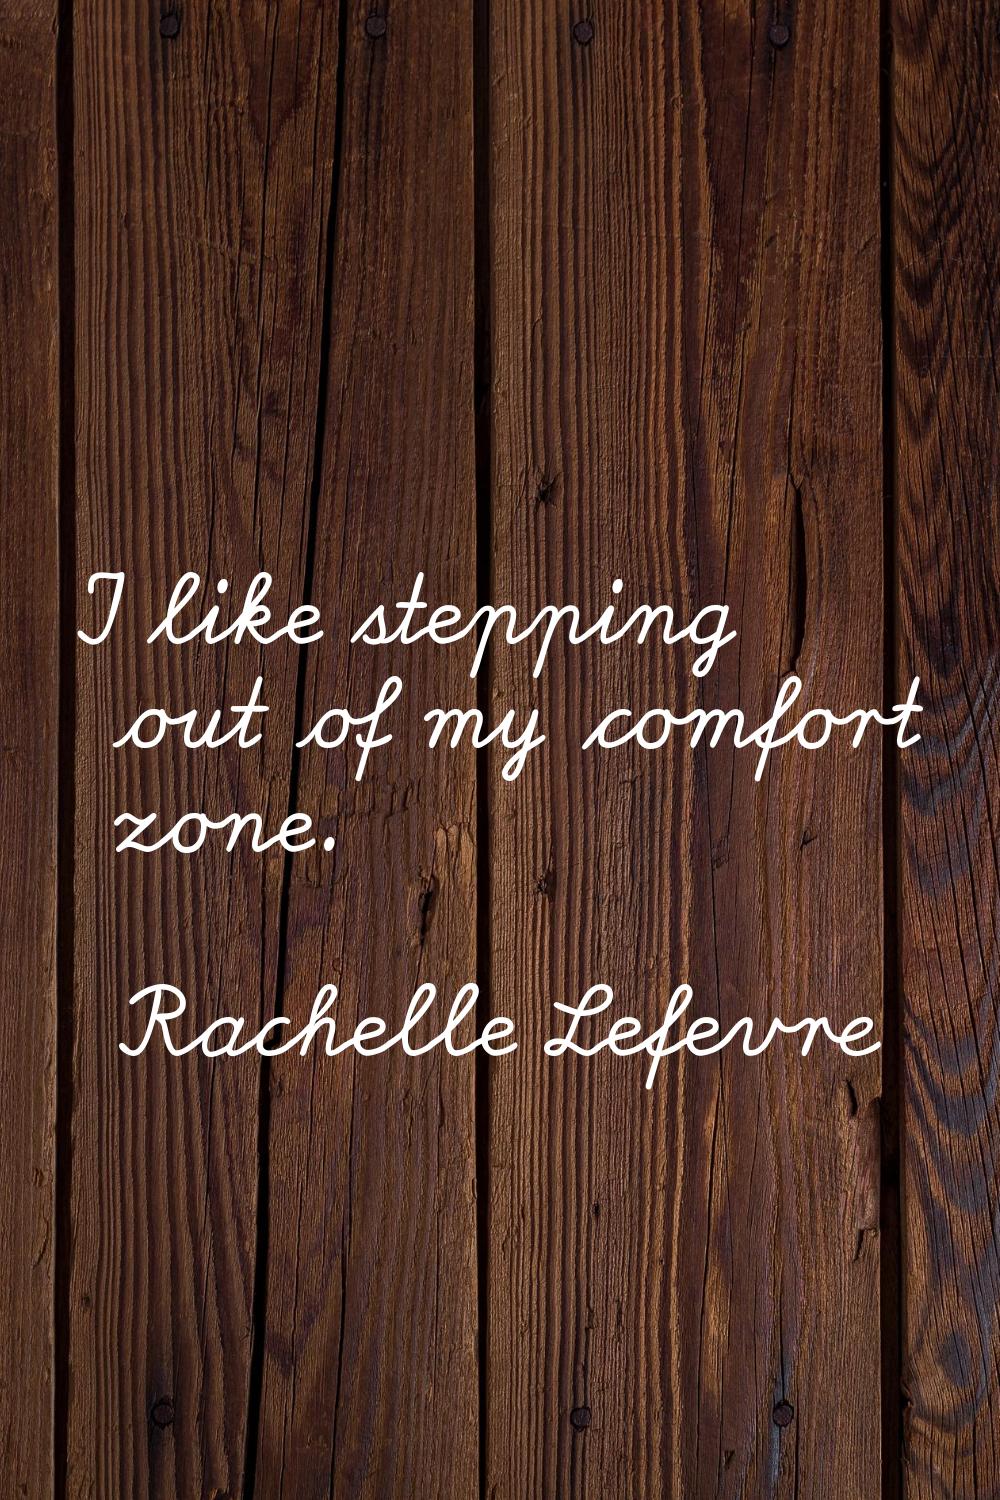 I like stepping out of my comfort zone.